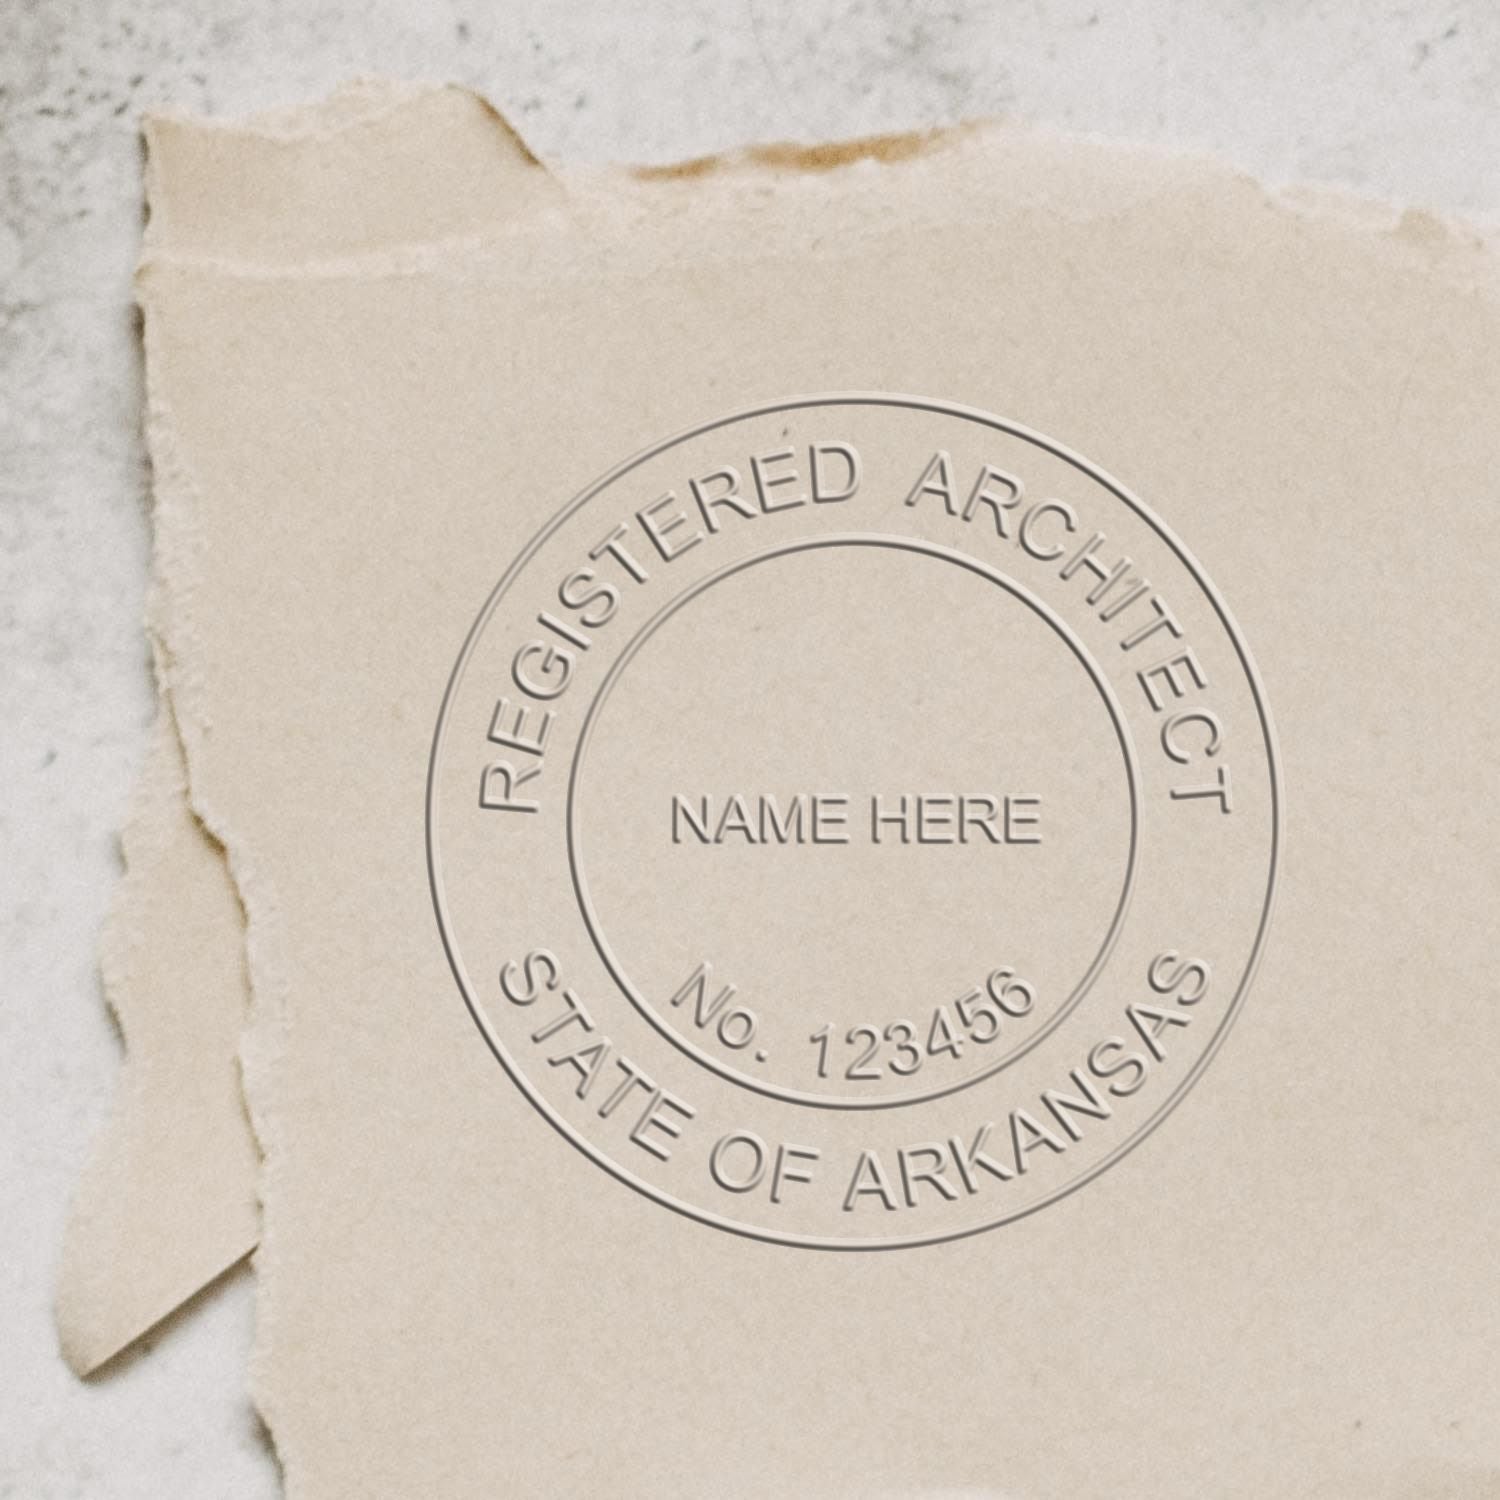 The State of Arkansas Architectural Seal Embosser stamp impression comes to life with a crisp, detailed photo on paper - showcasing true professional quality.